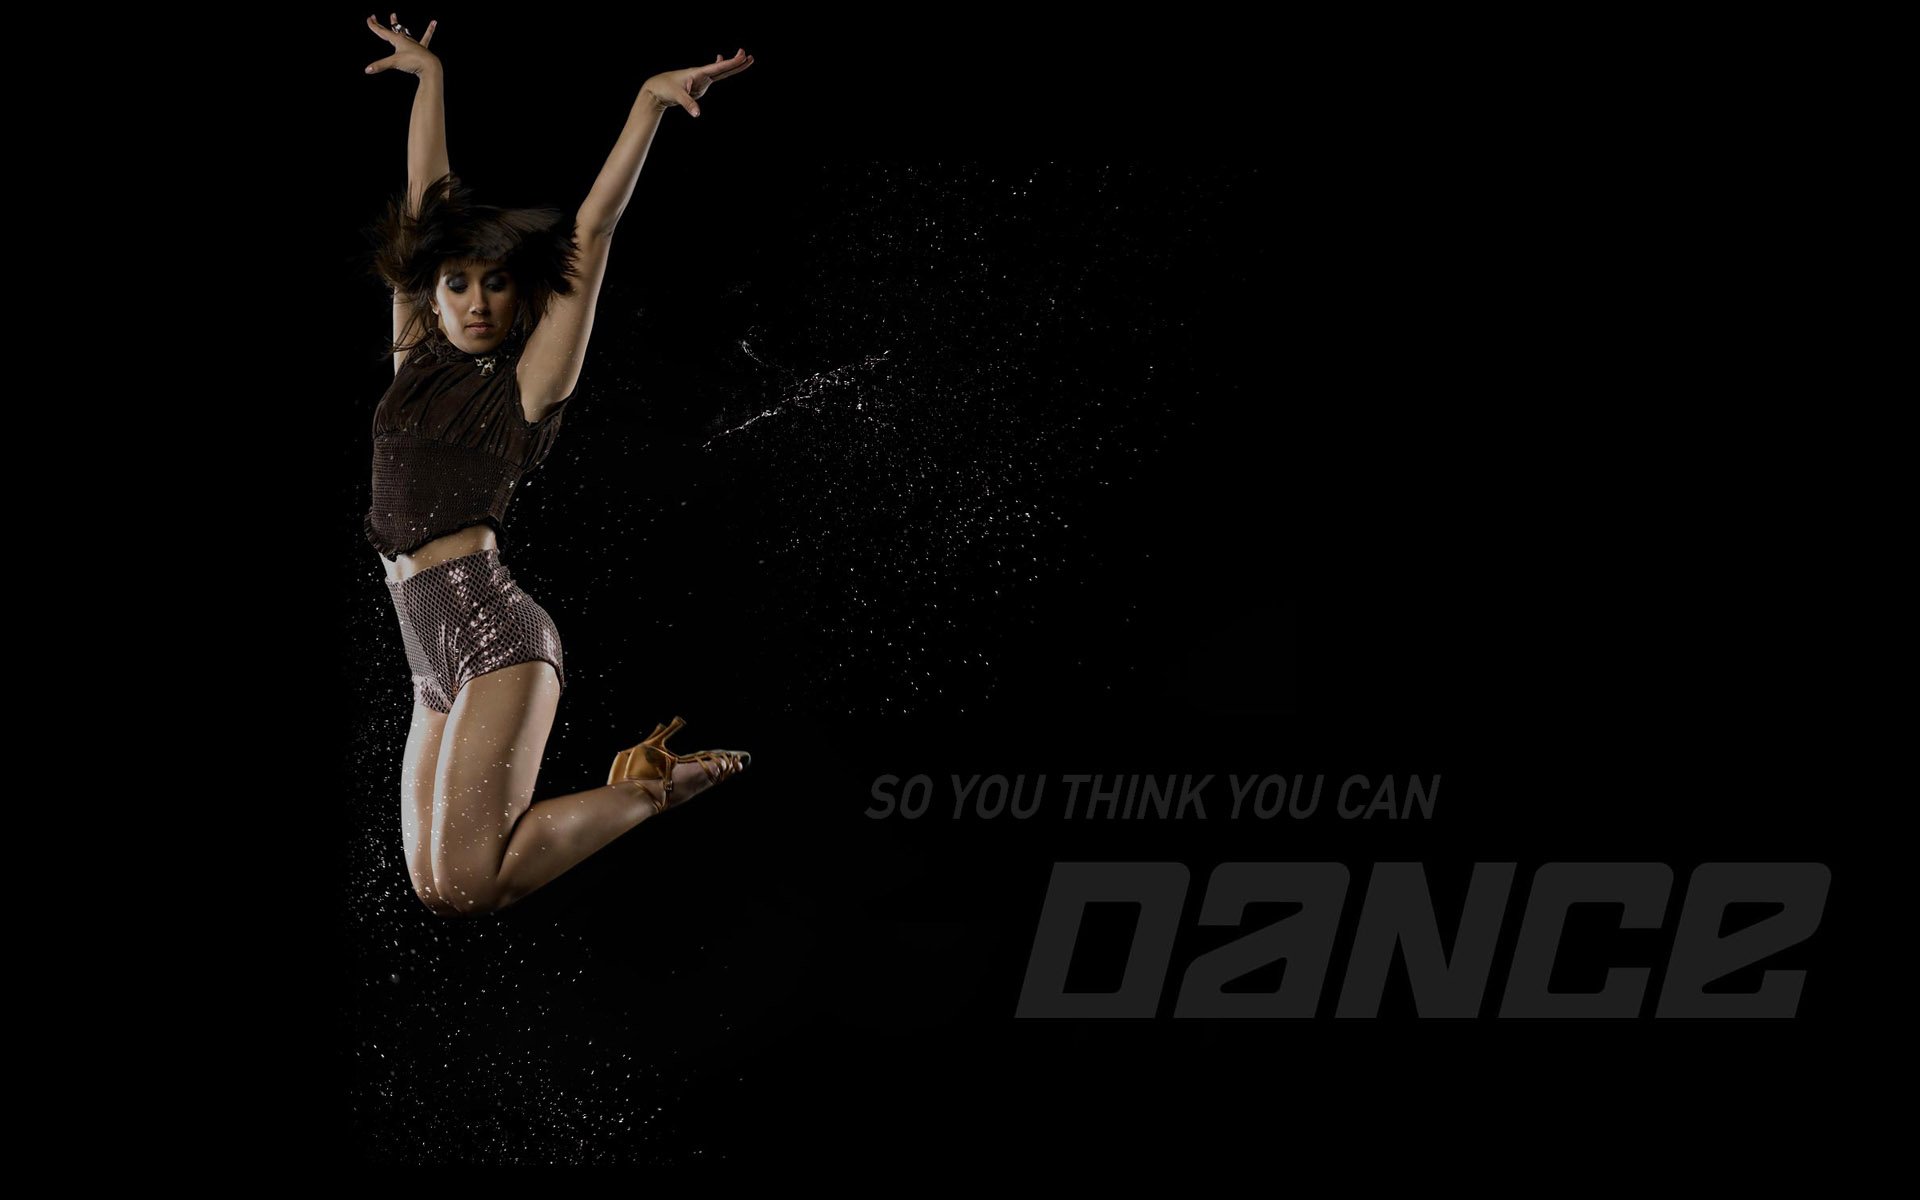 1920x1200 So You Think You Can Dance Wallpaper Background Image. 